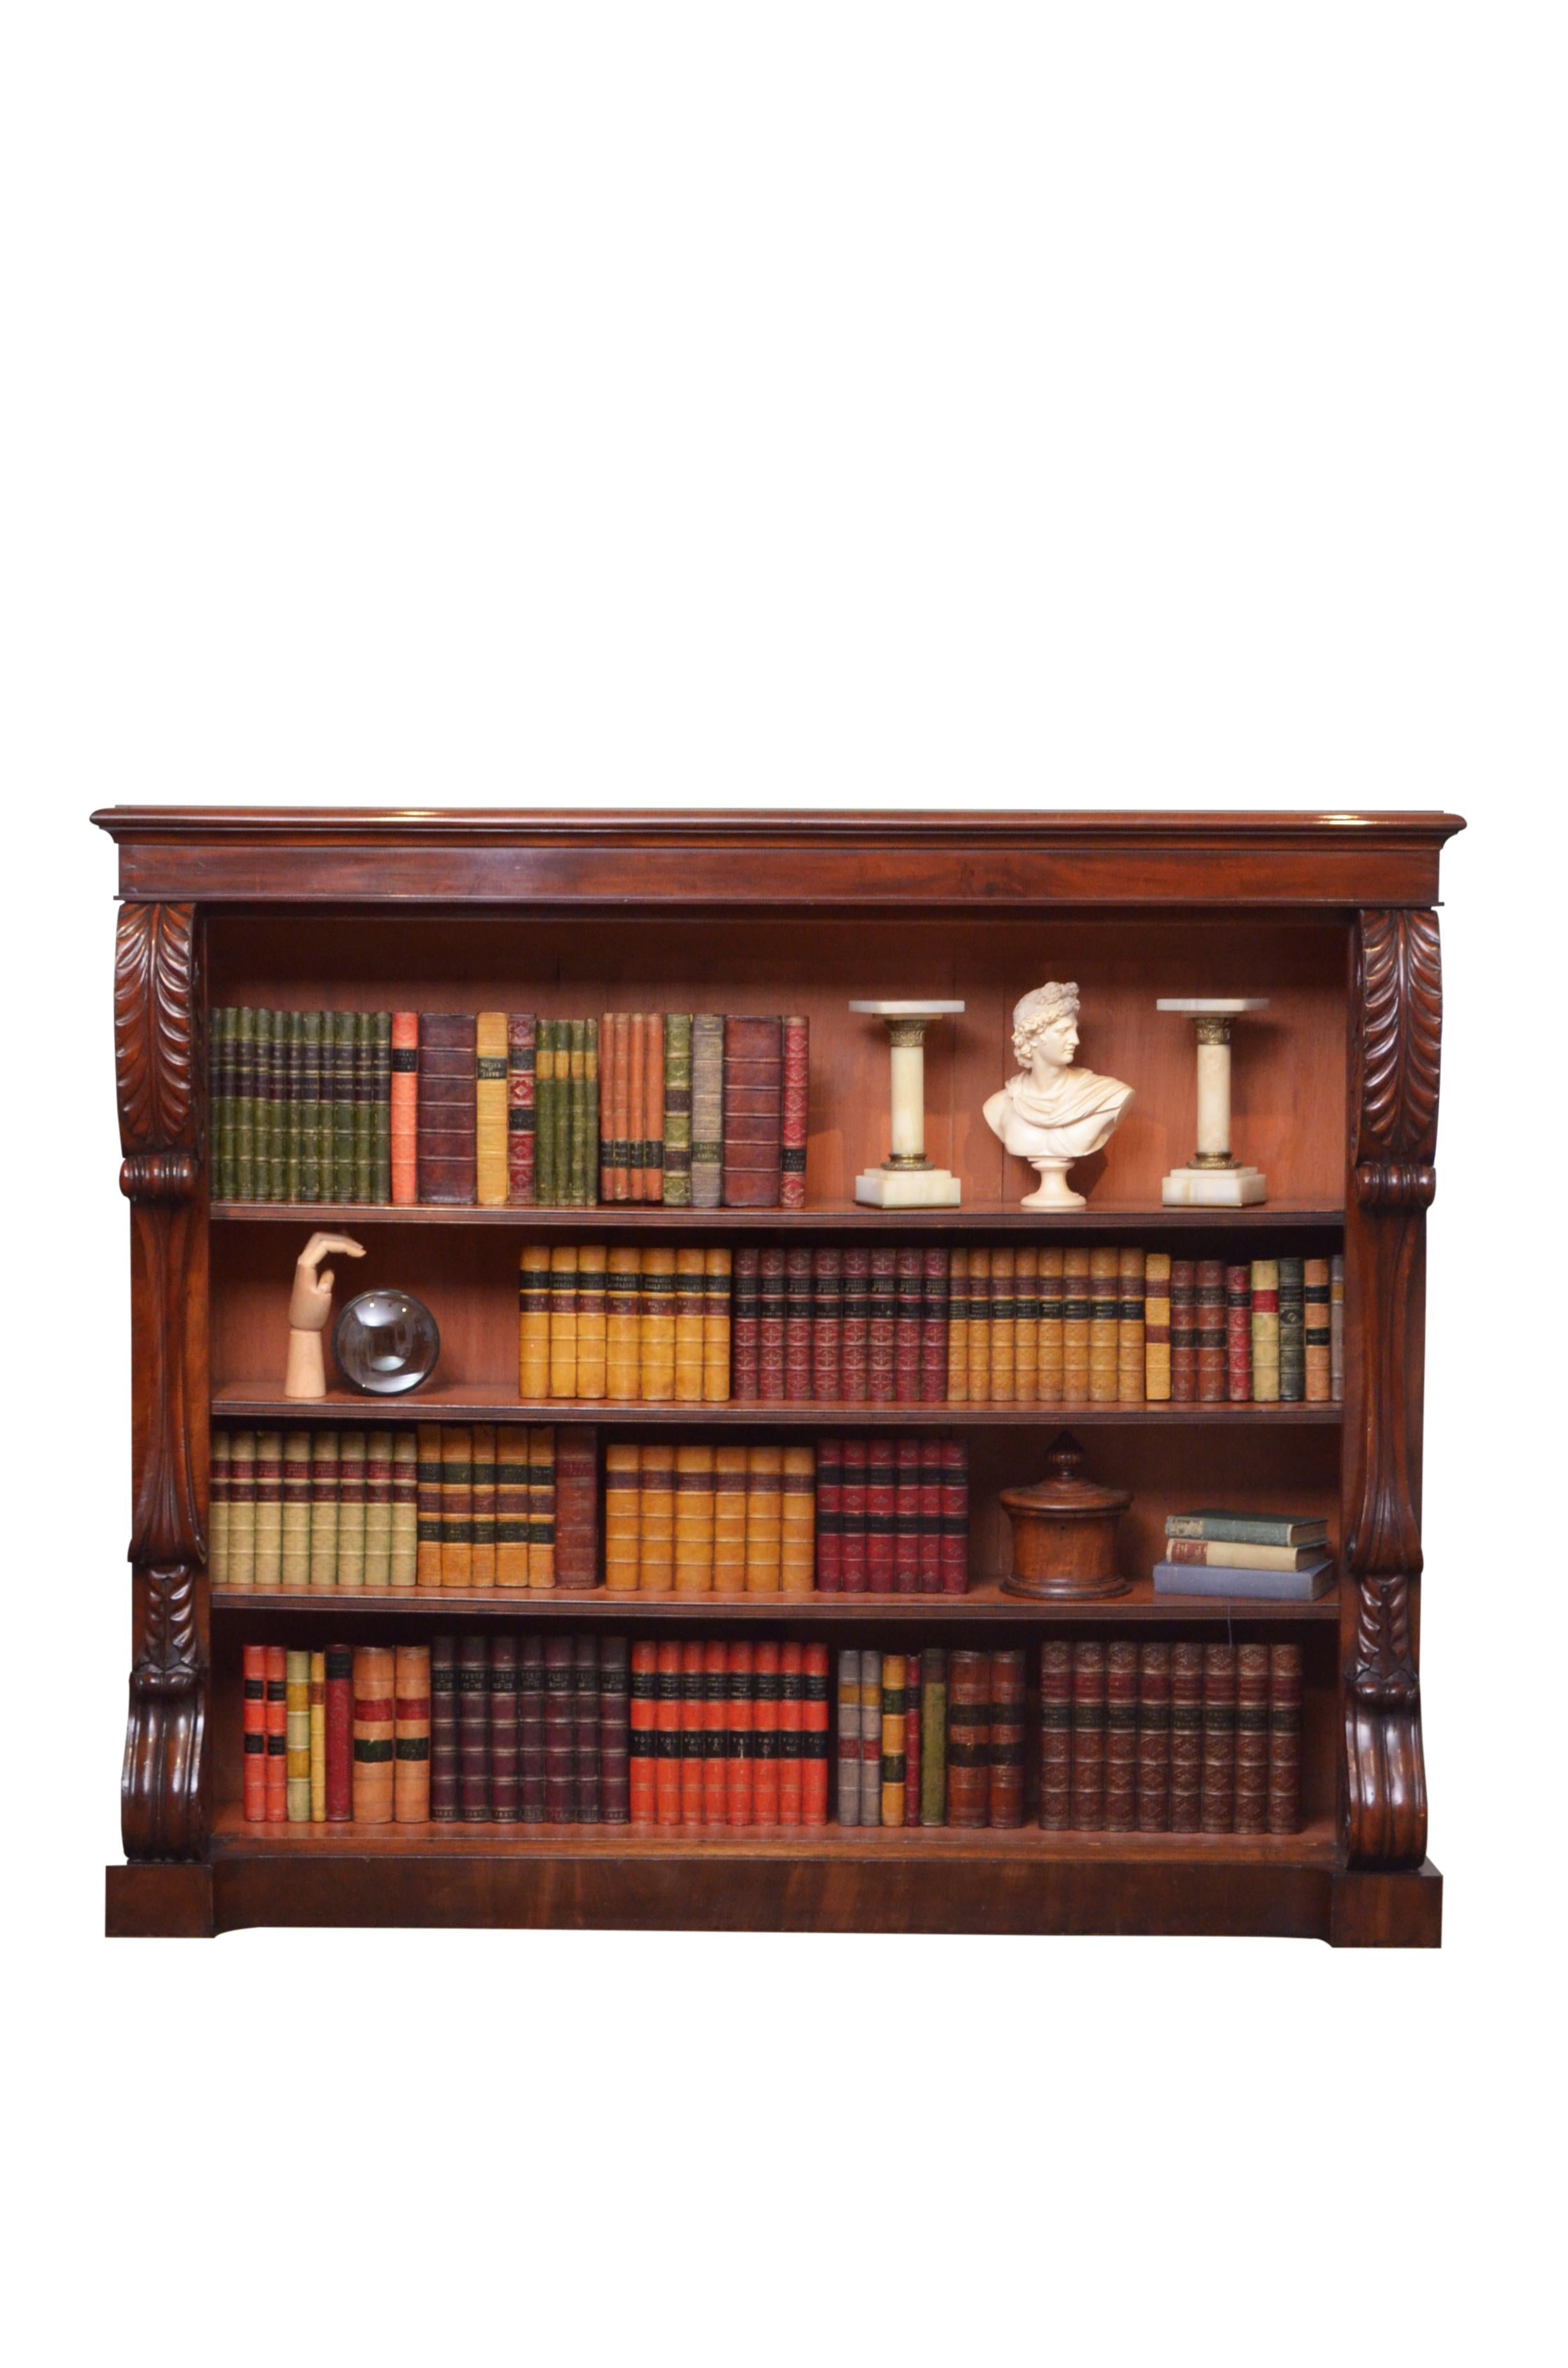 0586 Superb William IV open bookcase in mahogany, having figured mahogany top with moulded edge above shallow frieze and three shelves, all flanked by carved pilasters with outstanding acanthus leaf decoration to the top and fine scrolls to the